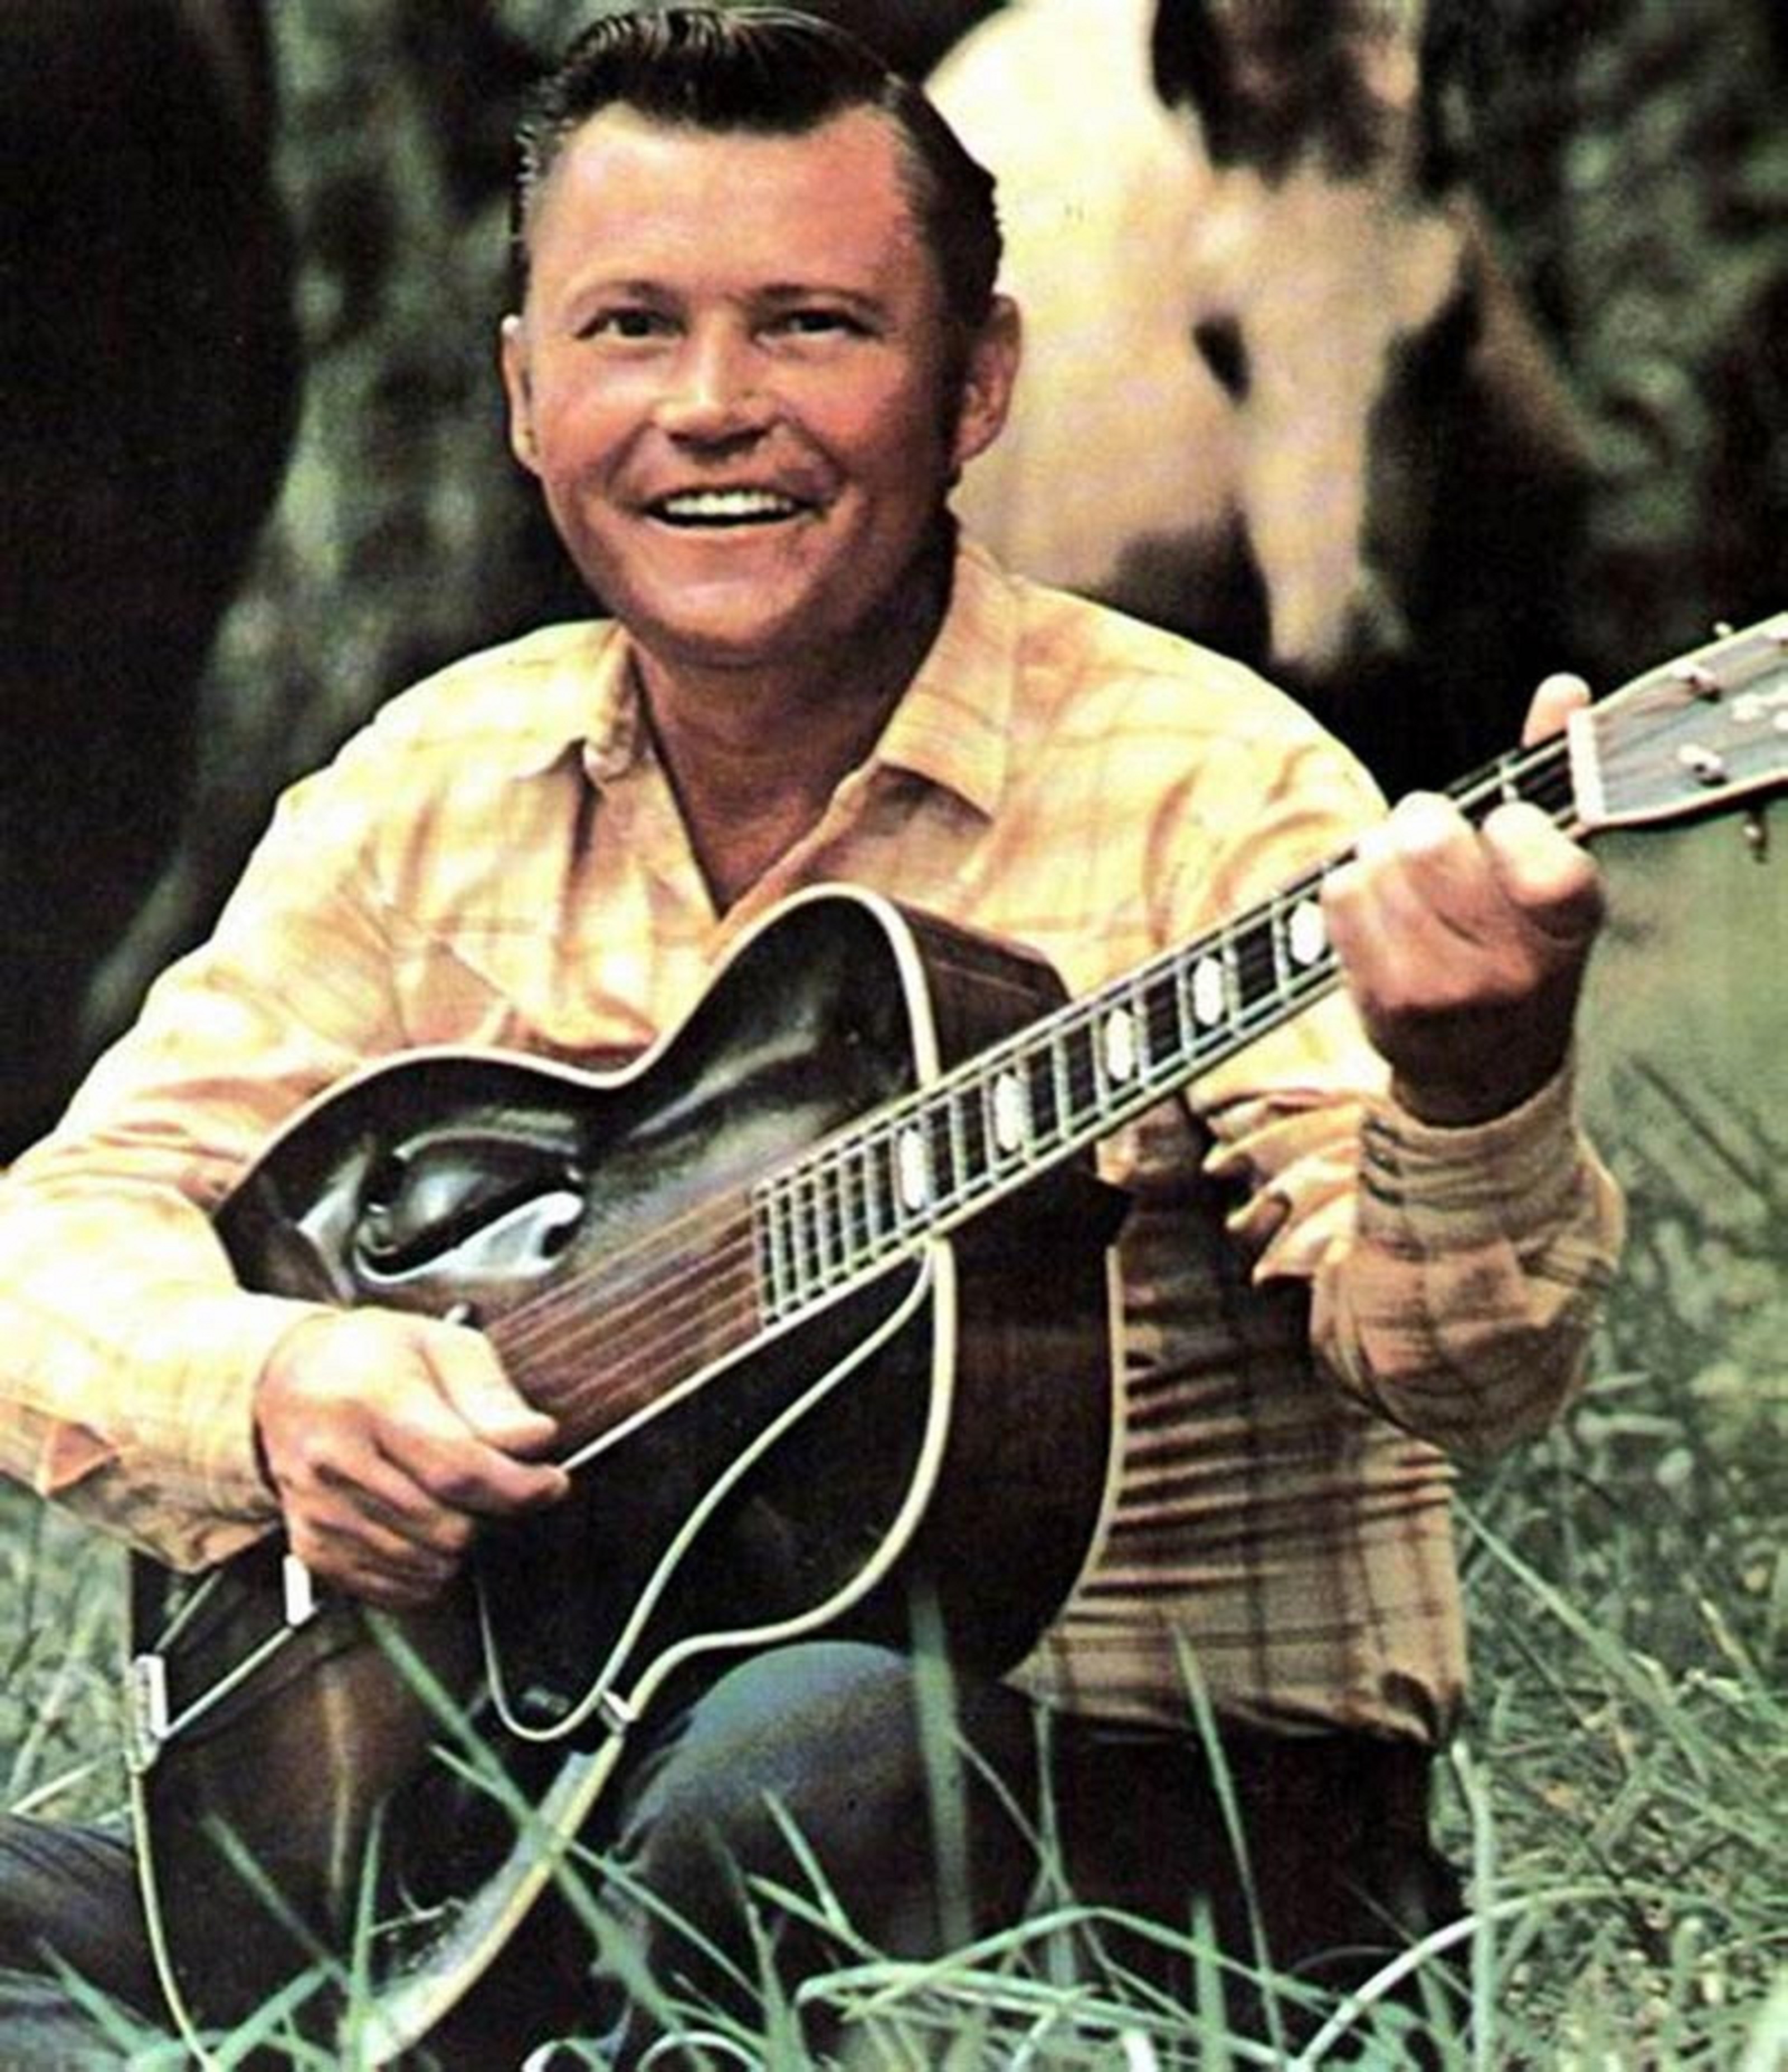 Fellow Singer/Songwriters and Friends Remember and Mourn The Loss of Country Music Legend Stonewall Jackson